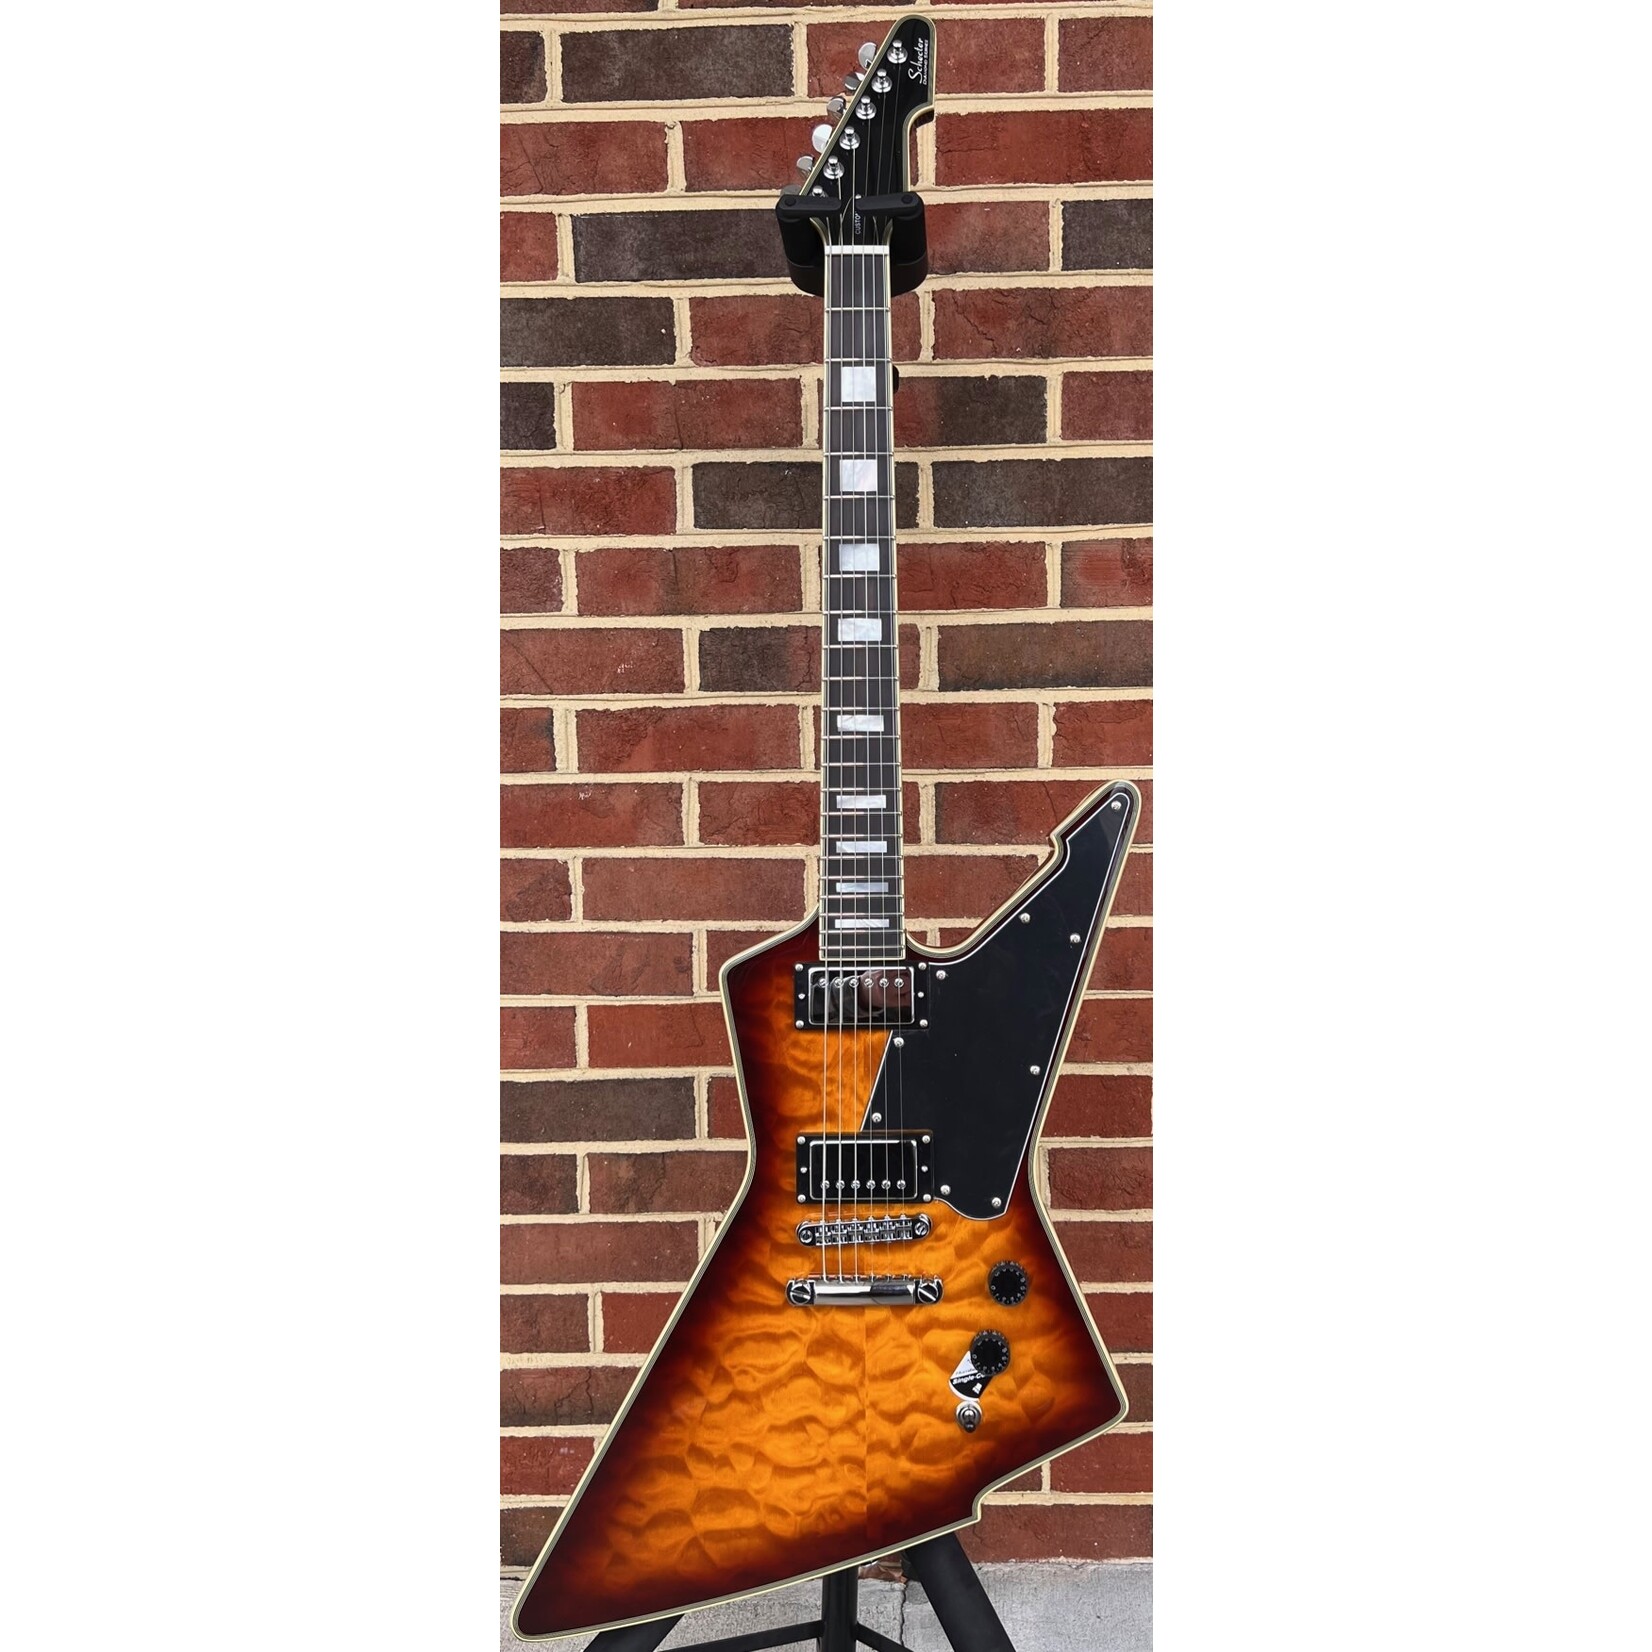 Schecter Guitar Research Schecter E-1 Custom, Vintage Sunburst, Quilted Maple Top, Ebony Fretboard, Locking Tuners, Schecter USA Sunset Strip/Pasadena Pickups, SN# W23111835